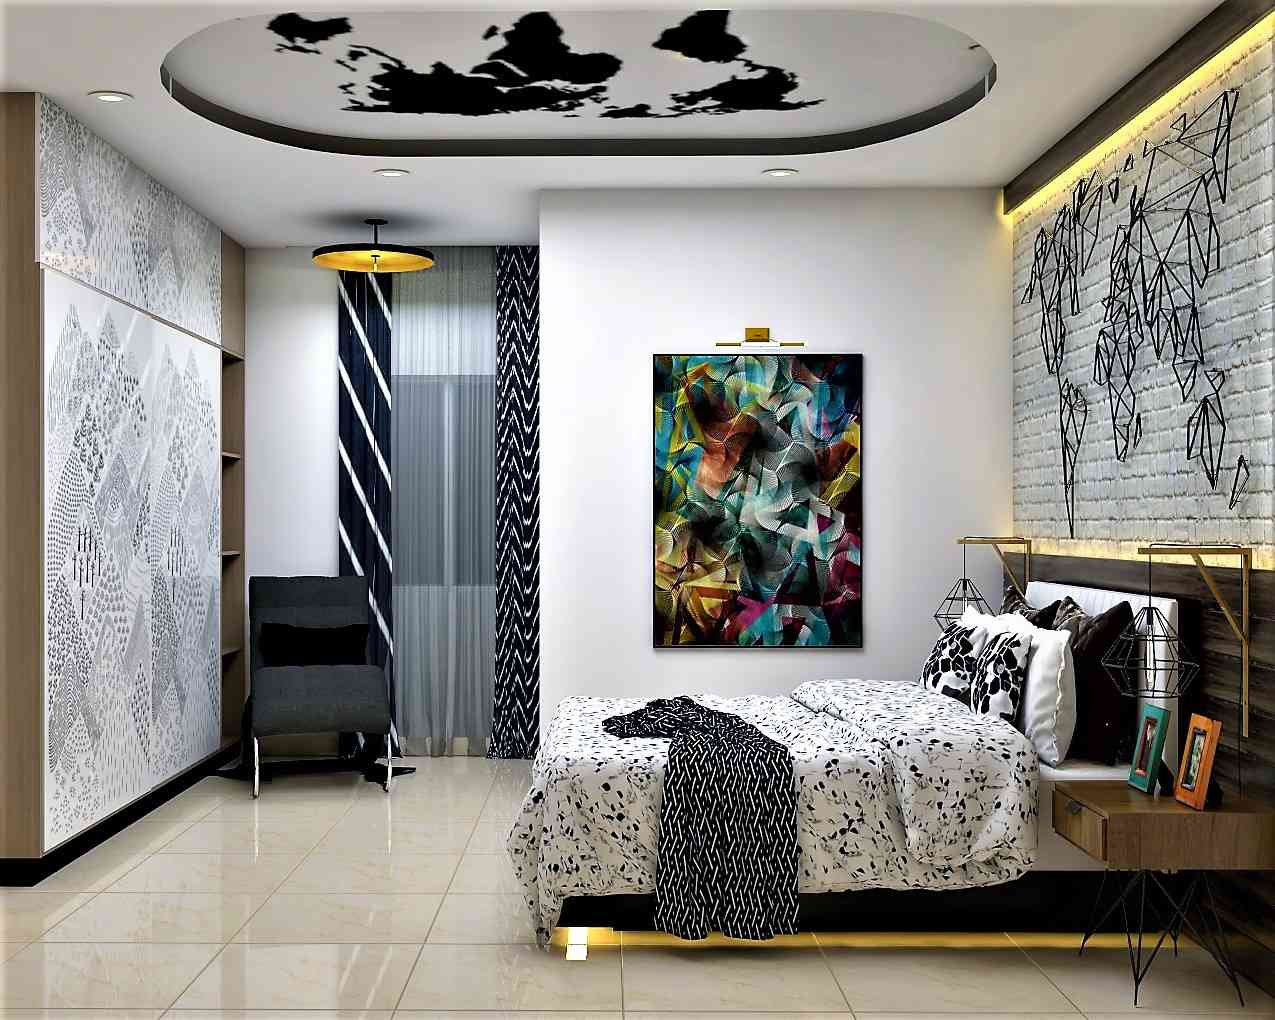 Contemporary Master Bedroom Design With An Artistic Wall